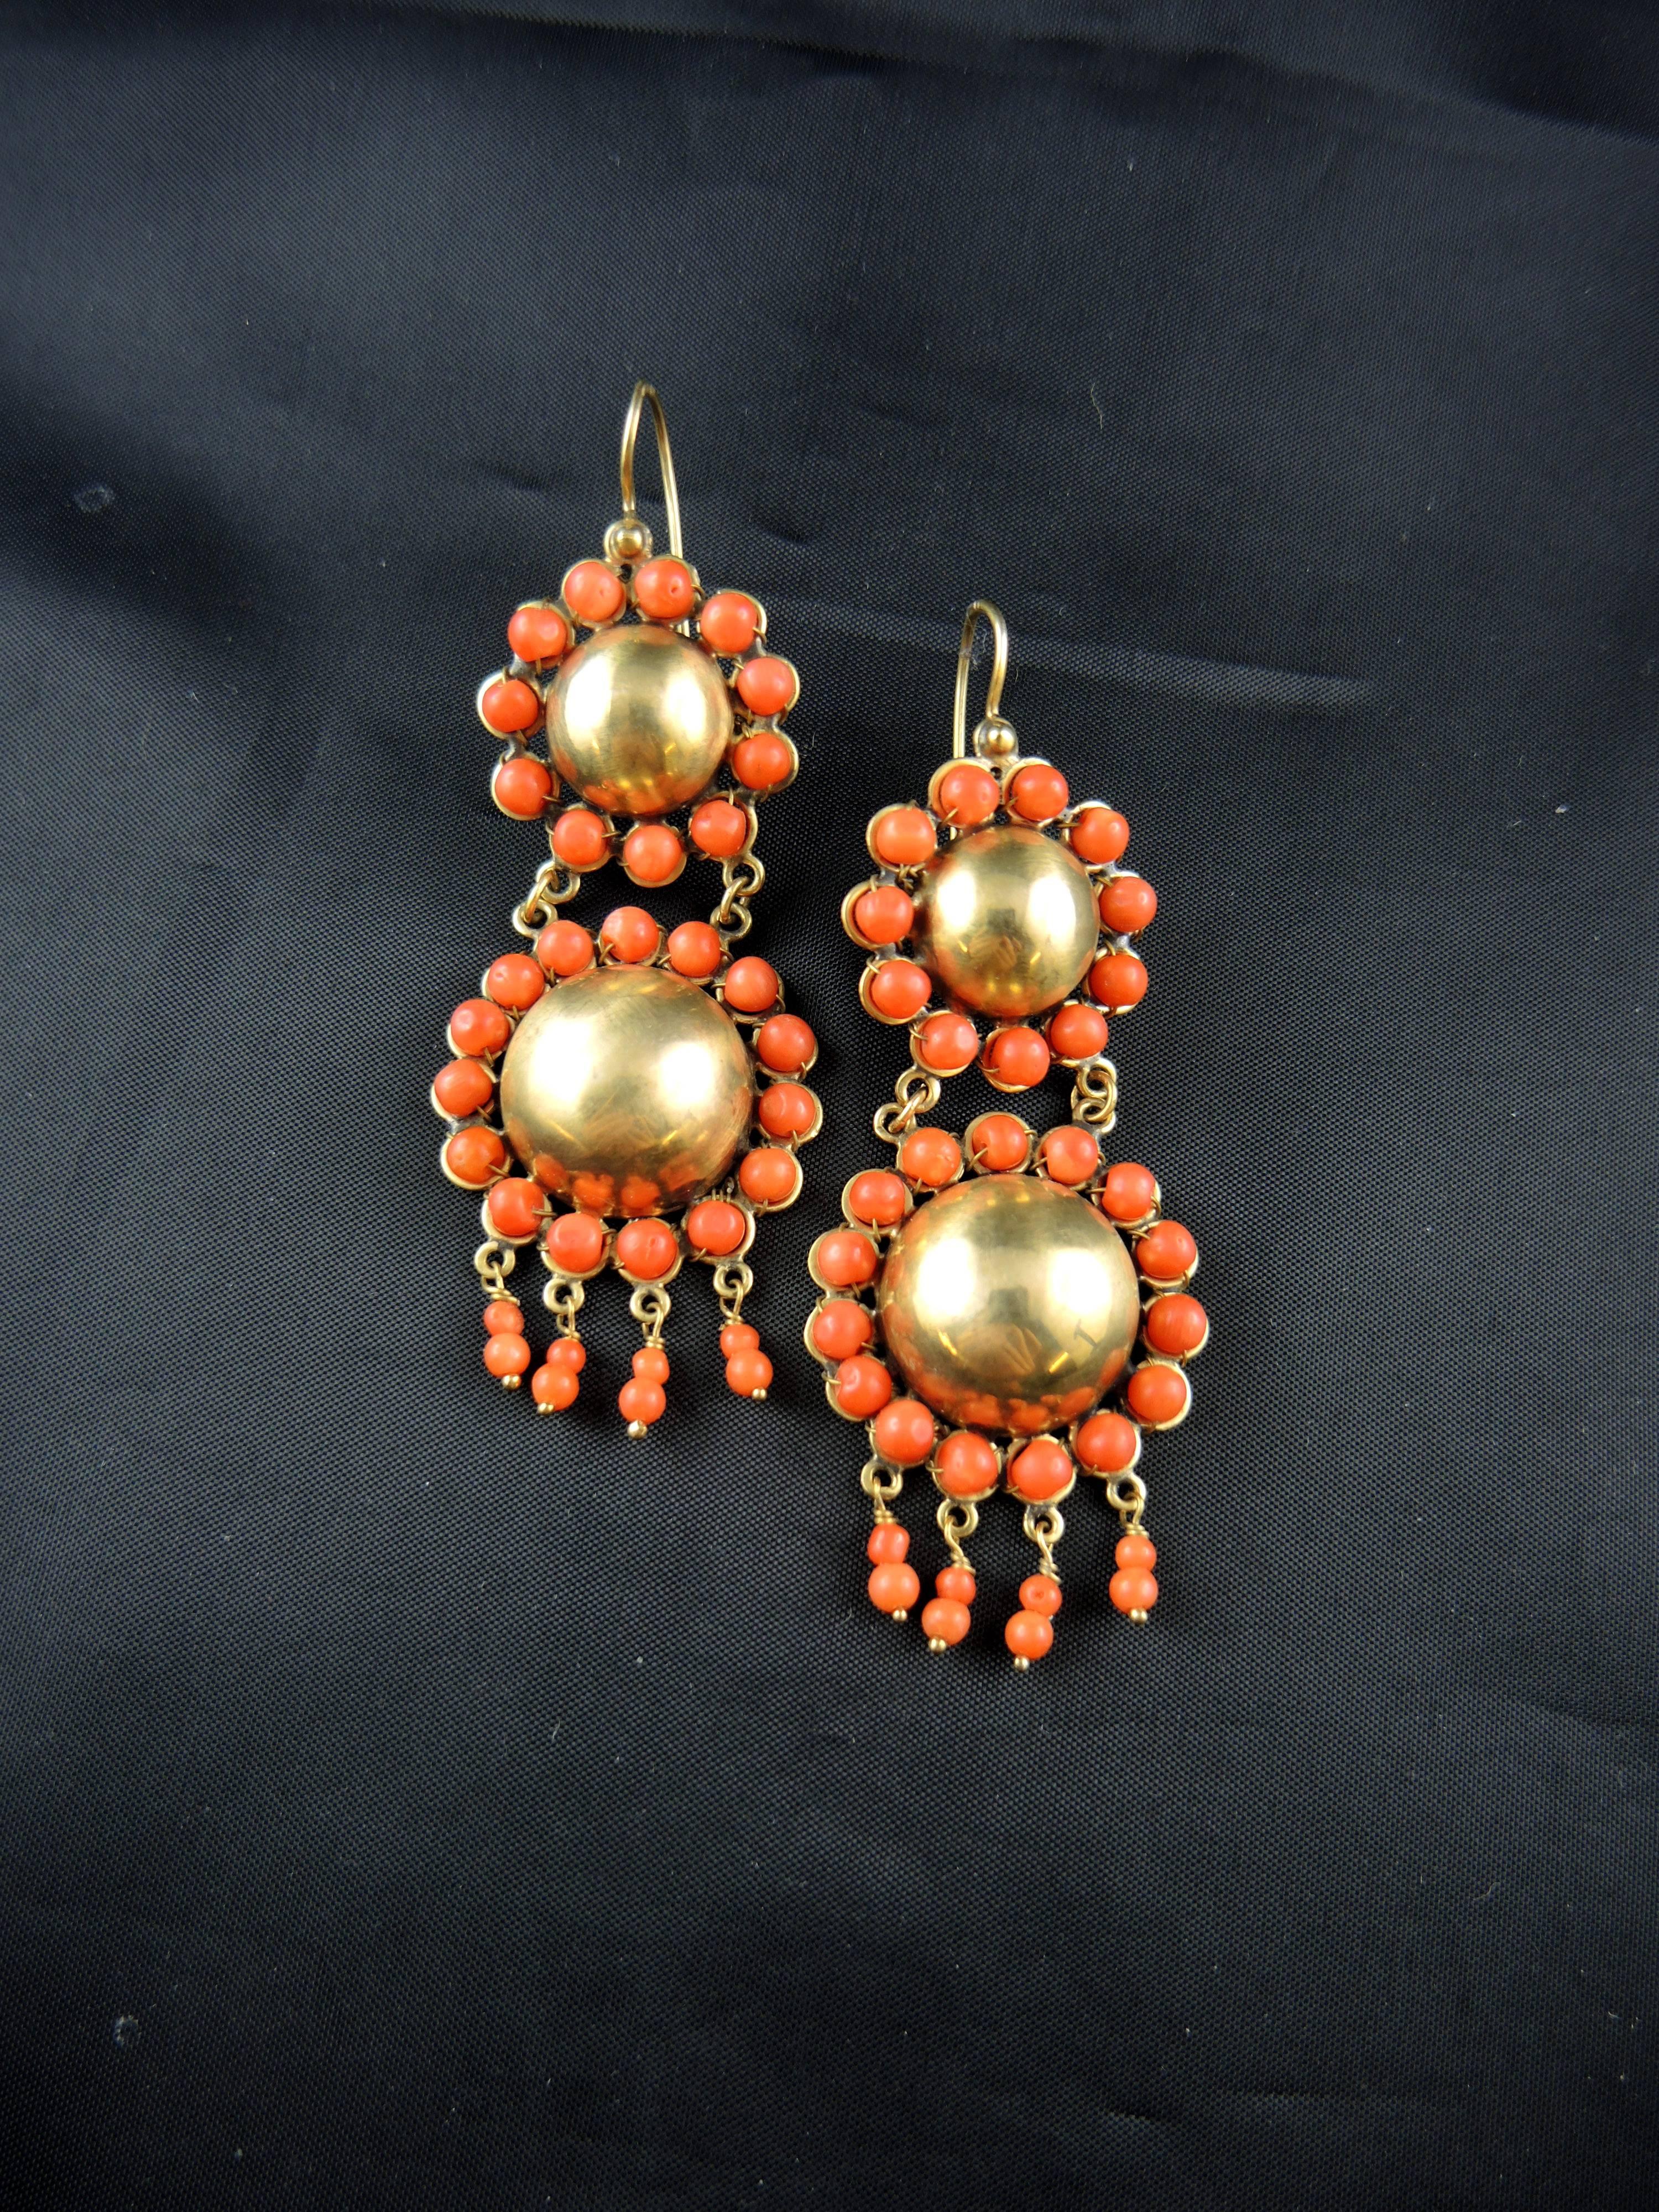 Stunning 9kt gold antique Chandelier Earrings (quality mark: clover) set half gold spheres surrounded with coral's pearls.

Italian work from the lat 19th century/ early 20th century.

Weight: 17,50 g
Height: 7,50 cm

State : very little scratches